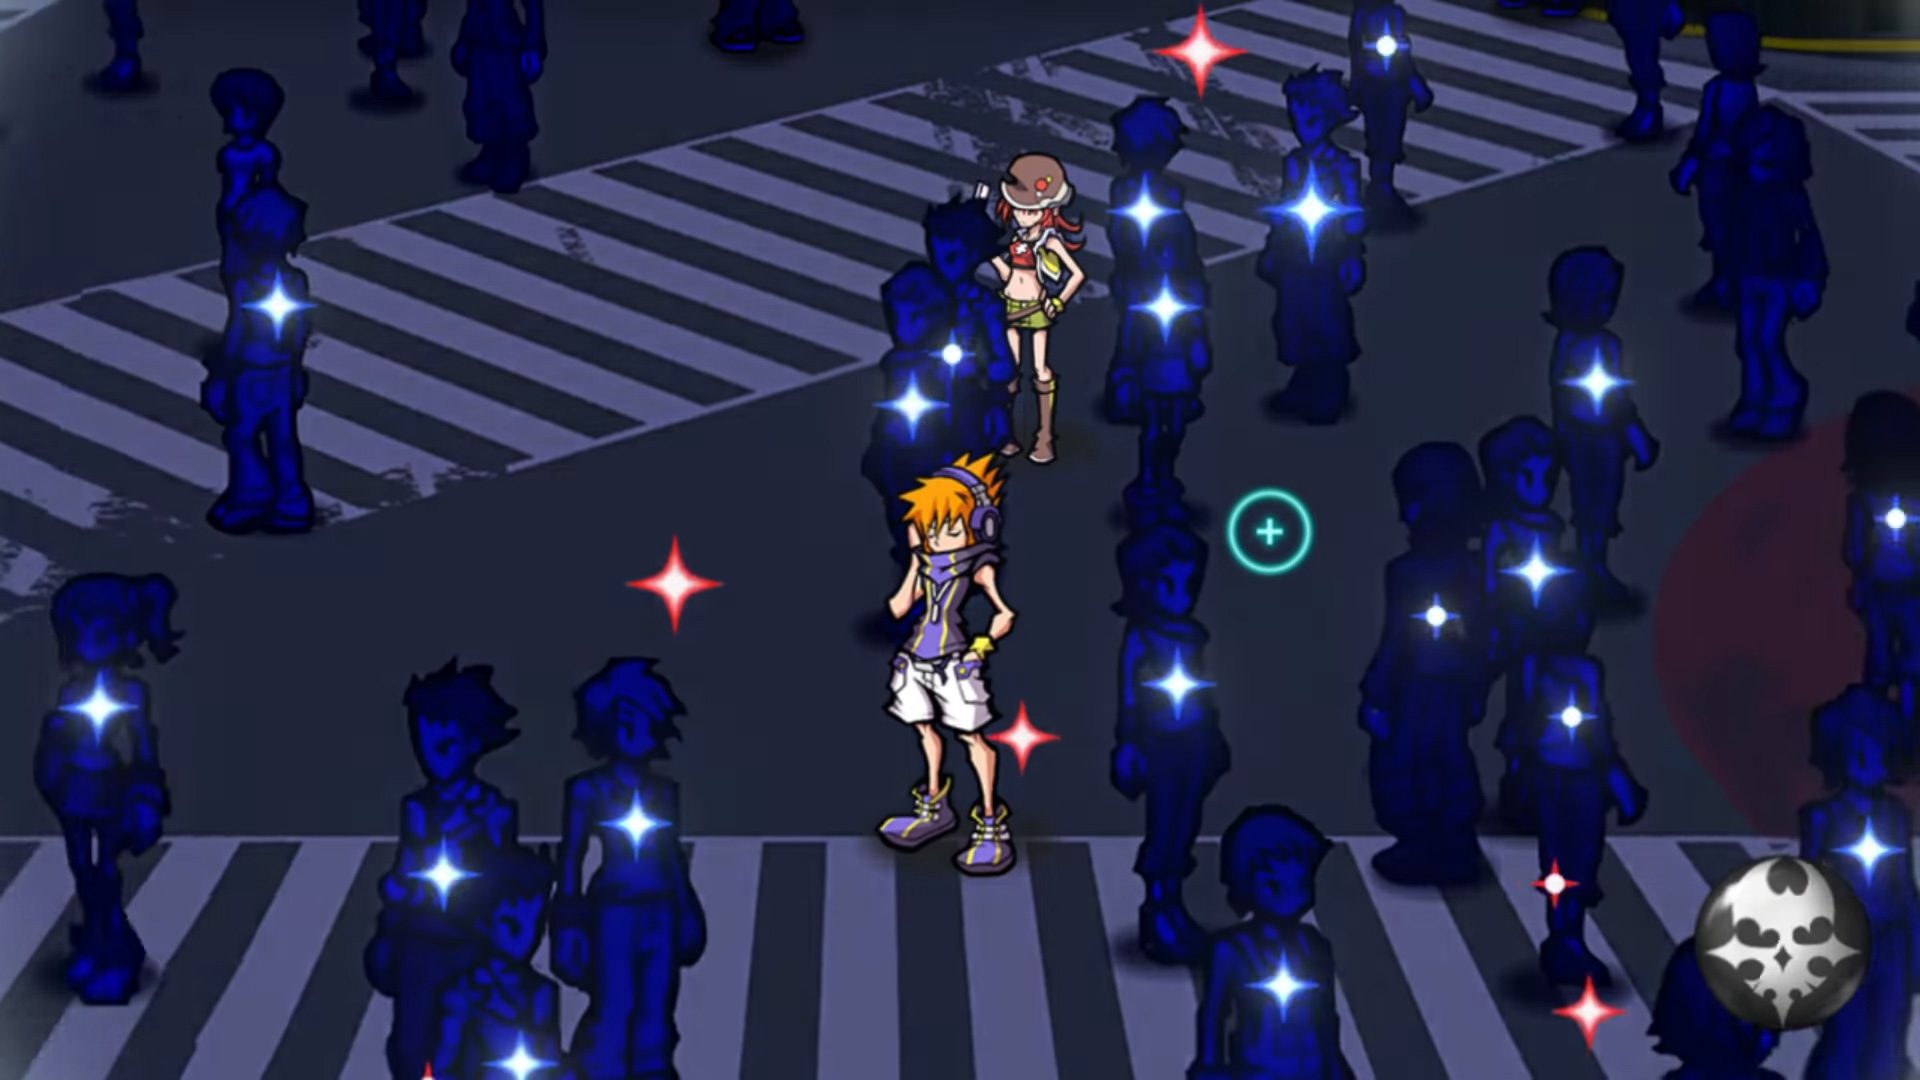 The World Ends with You: Final Remix Nintendo Switch Online trial